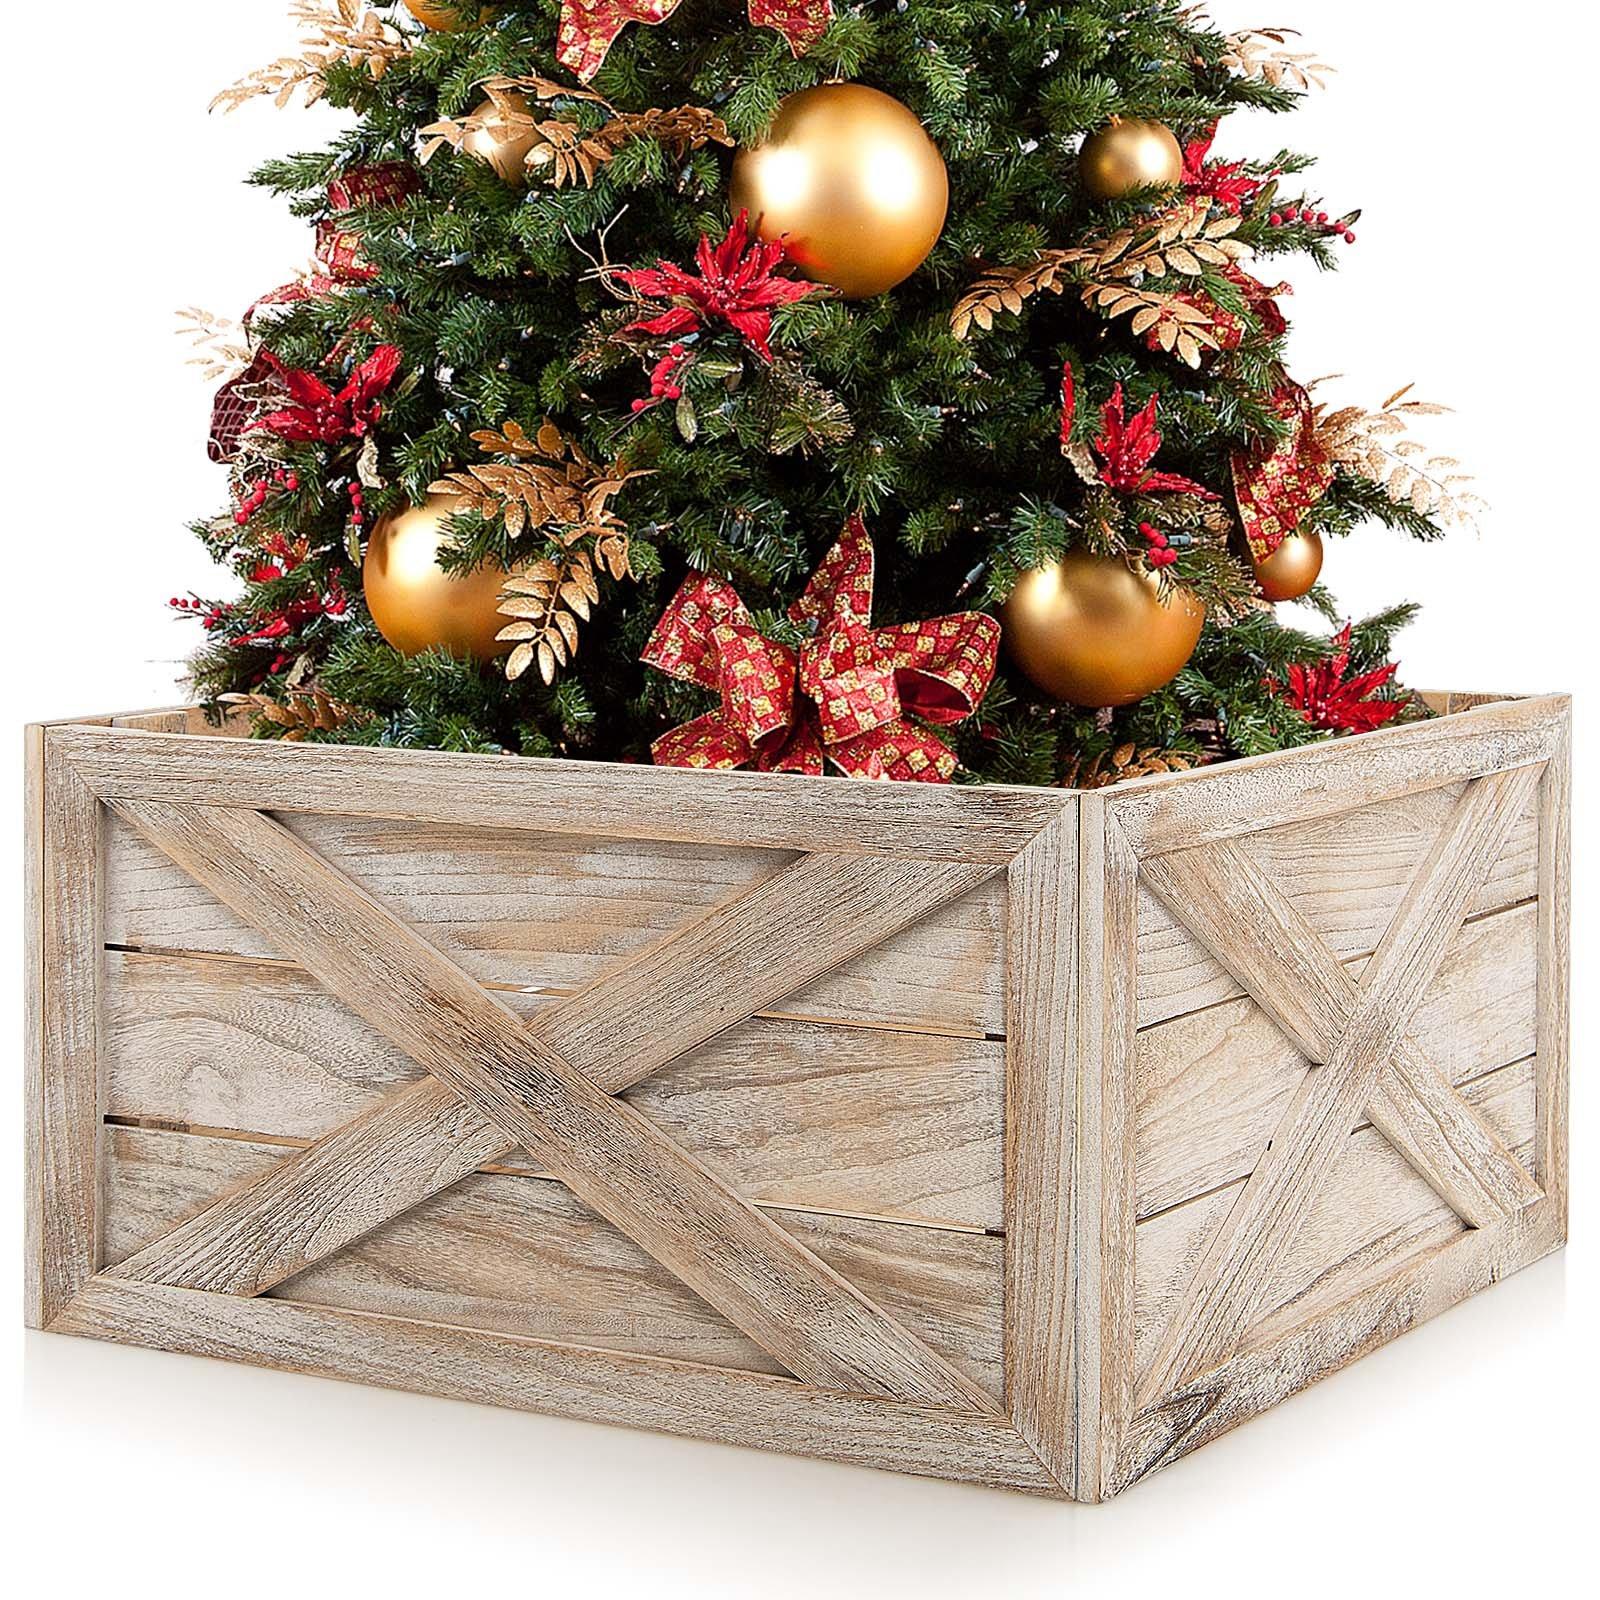 Vintage Christmas Tree Collar Box  100% Solid Wood Wooden Tree Box Stand Cover W/ Hook & Loop Fasten